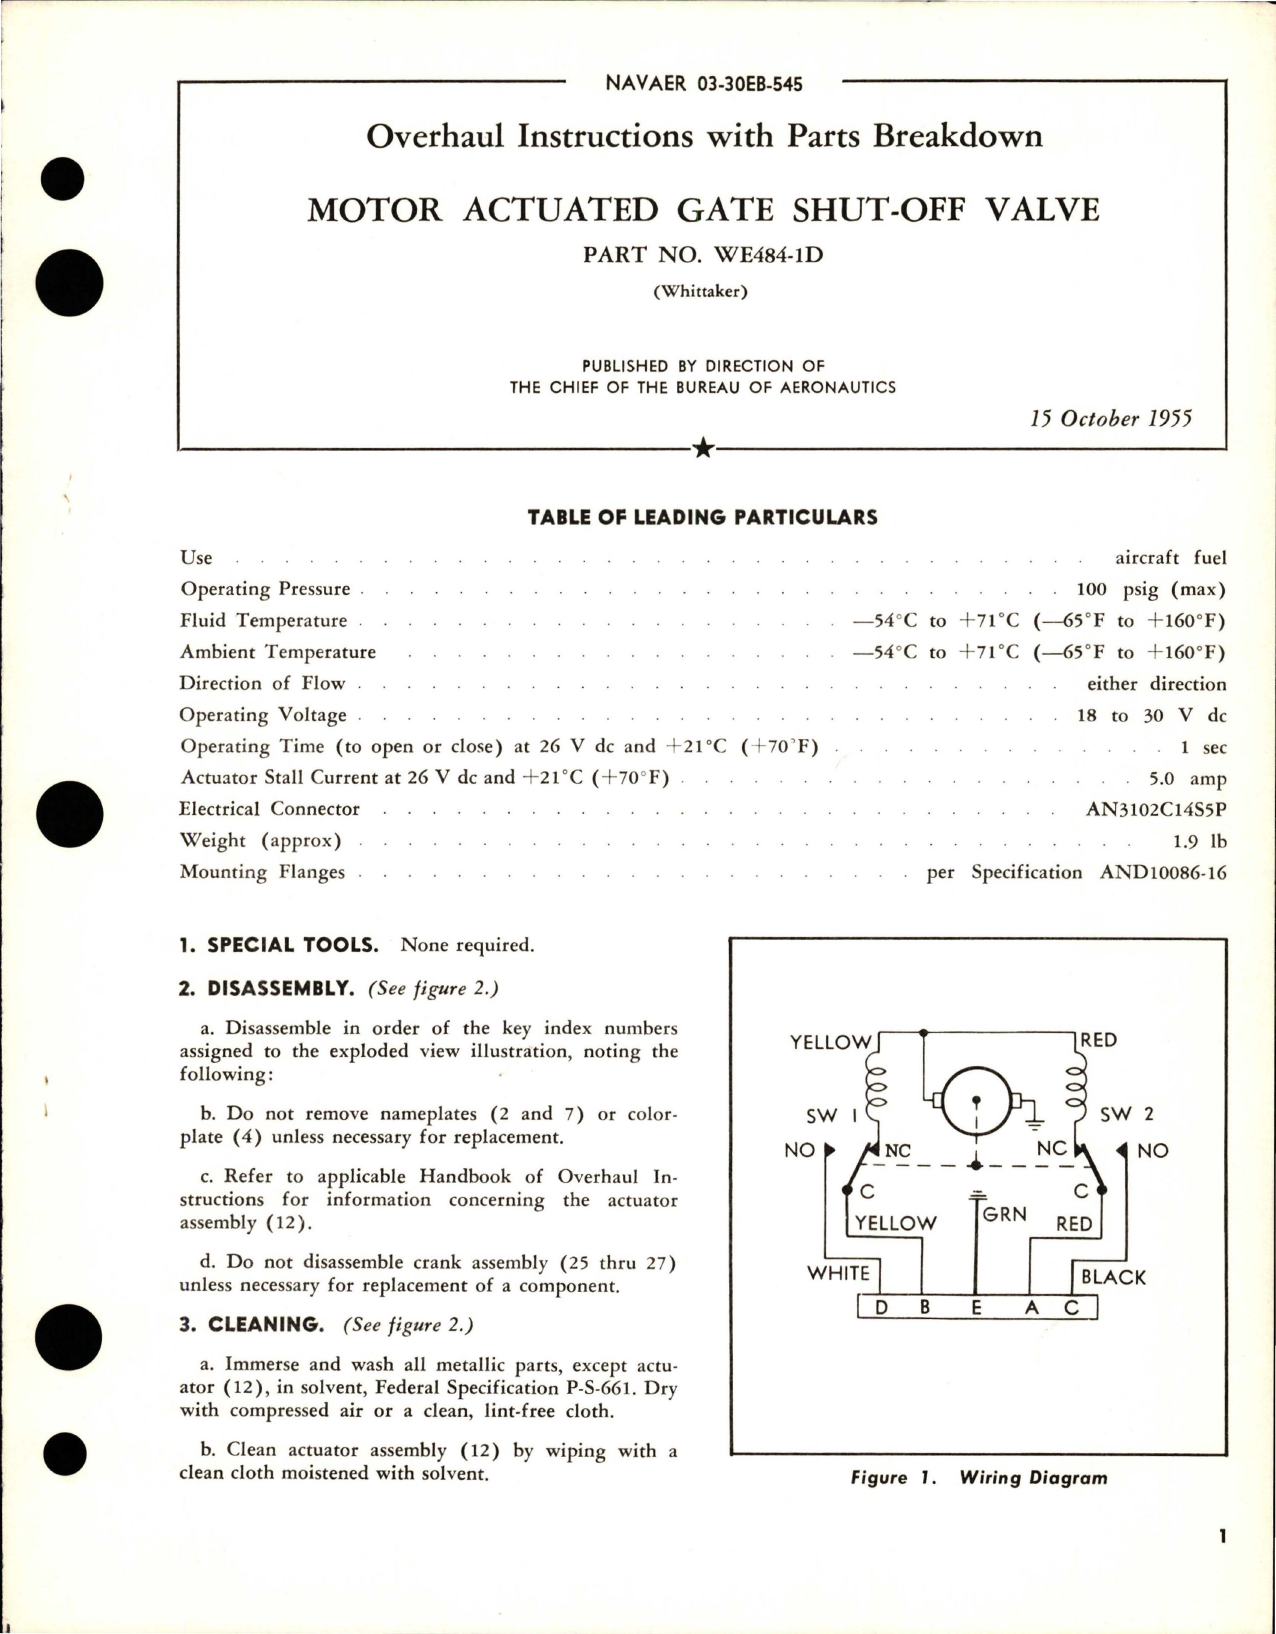 Sample page 1 from AirCorps Library document: Overhaul Instructions with Parts for Motor Actuated Gate Shut Off Valve - Part WE484-1D